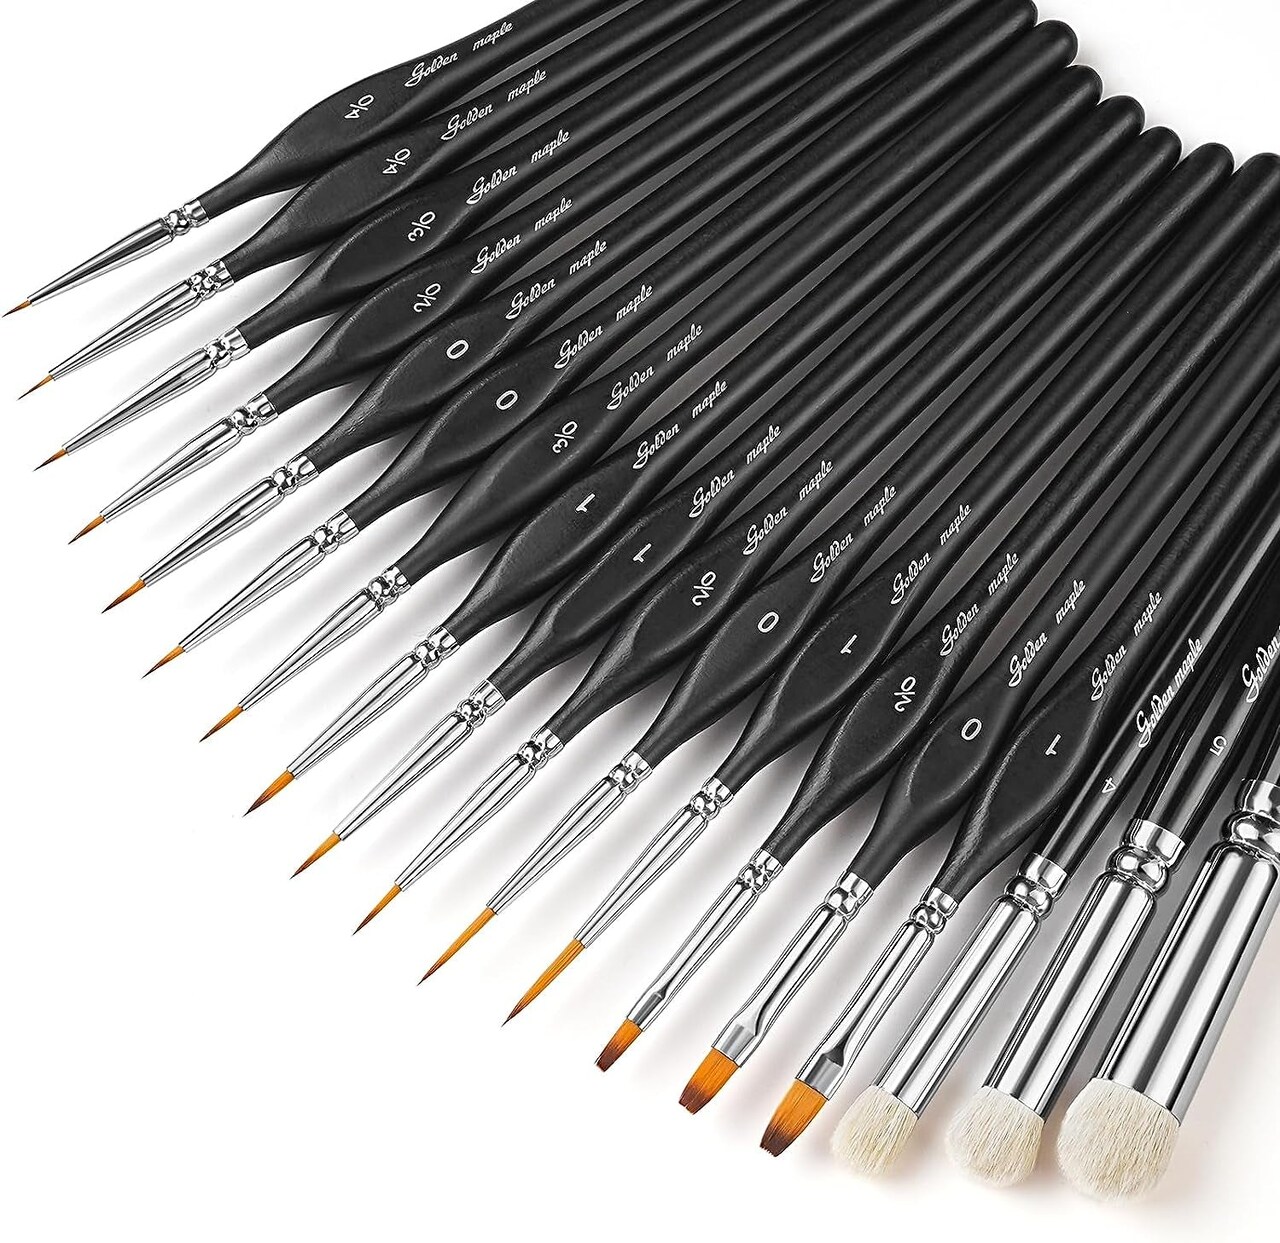 Miniature Paint Brushes, 15PC Model Brushes Micro Detail Paint Brush Set,  Fine Detailing for Acrylics, Oils, Watercolors & Paint by Number, Citadel,  Figurine, Warhammer 40K